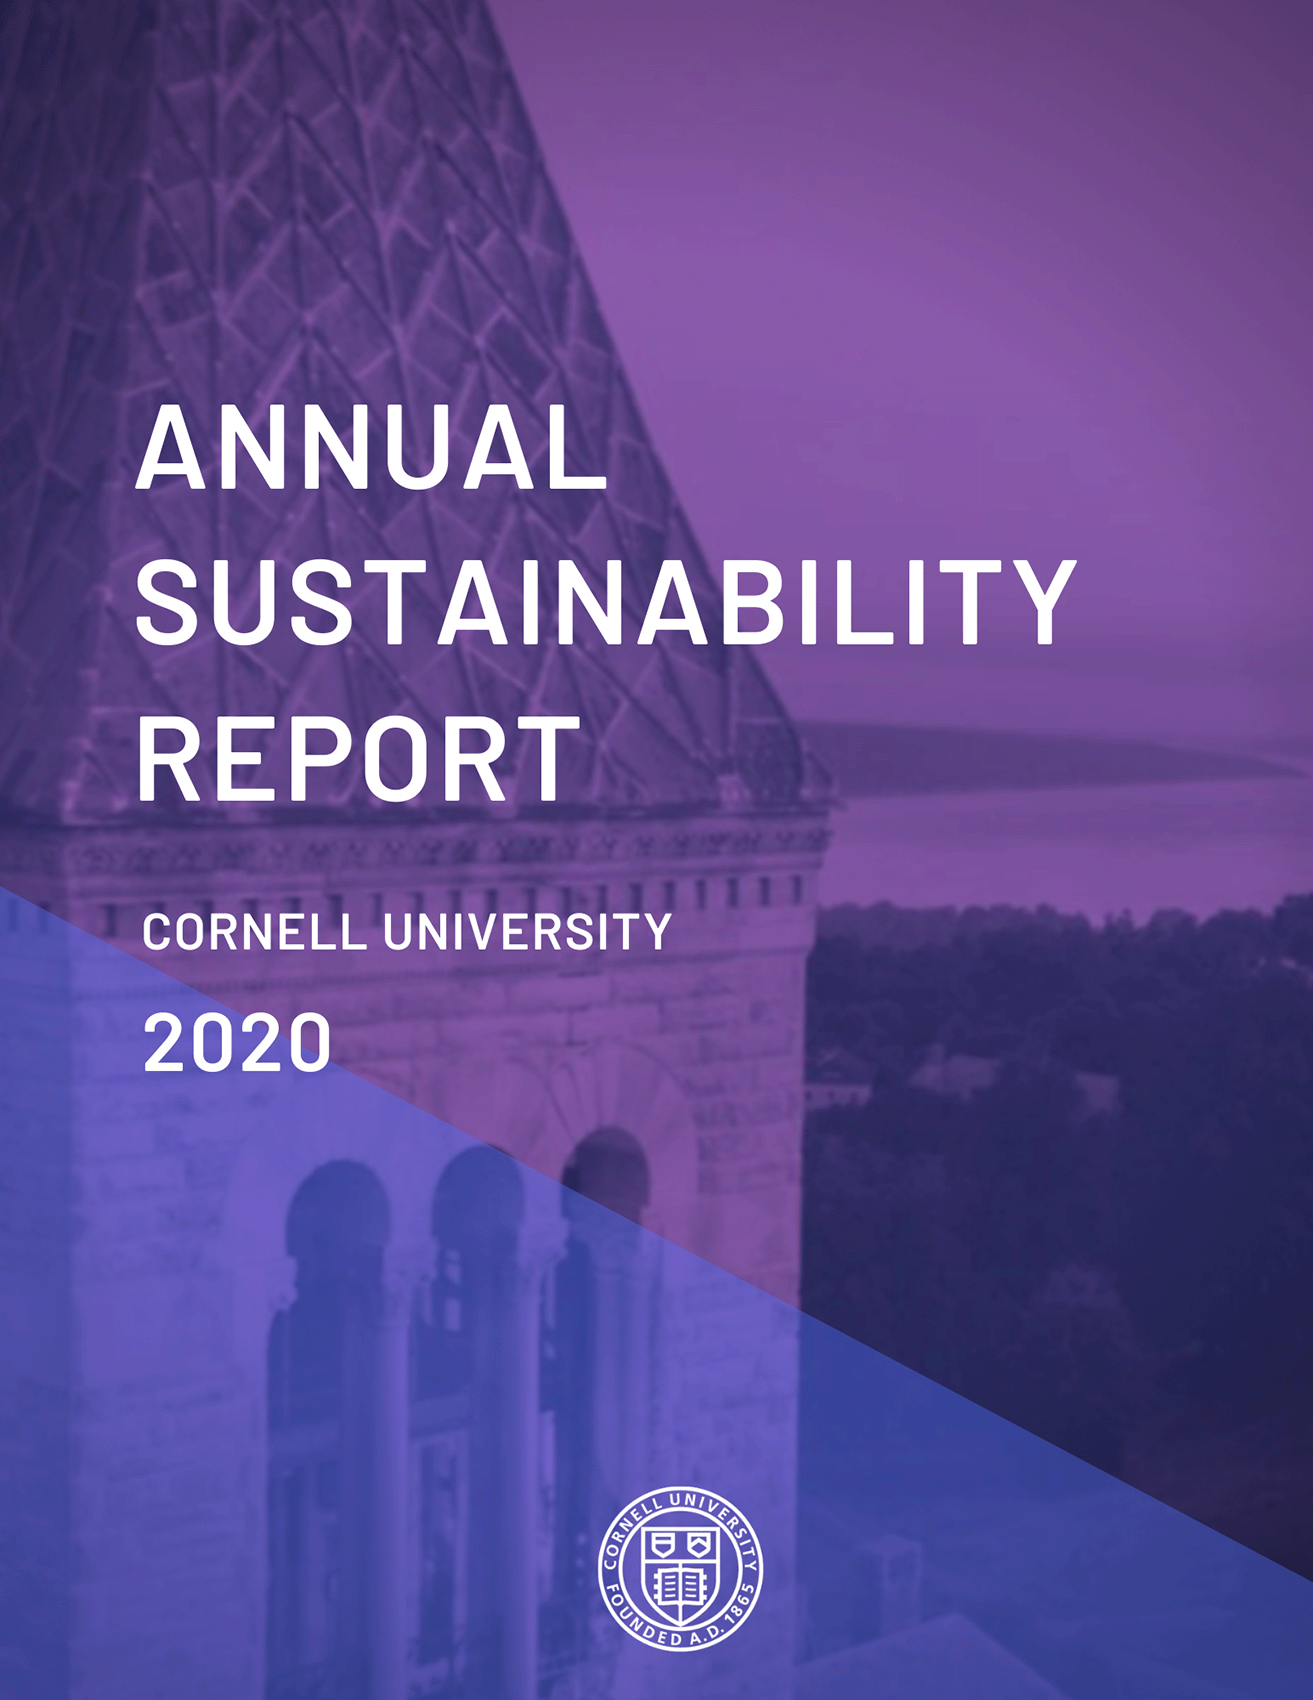 2020 Annual Sustainability Report